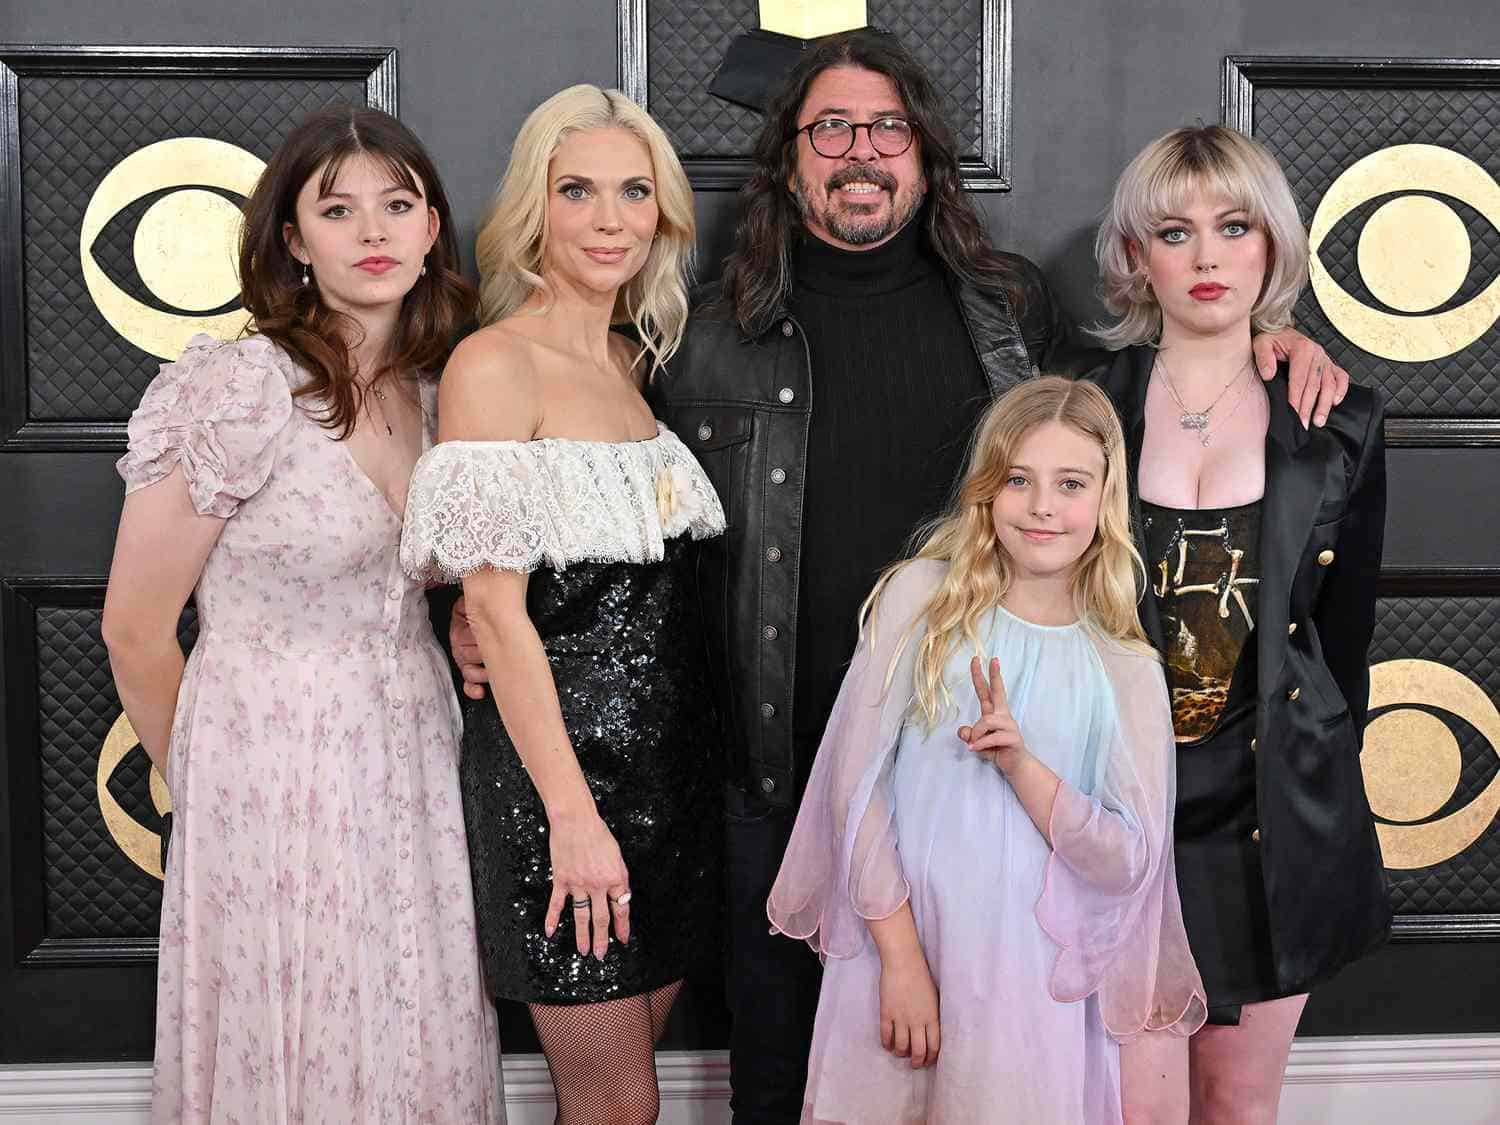 Dave Grohl with his family